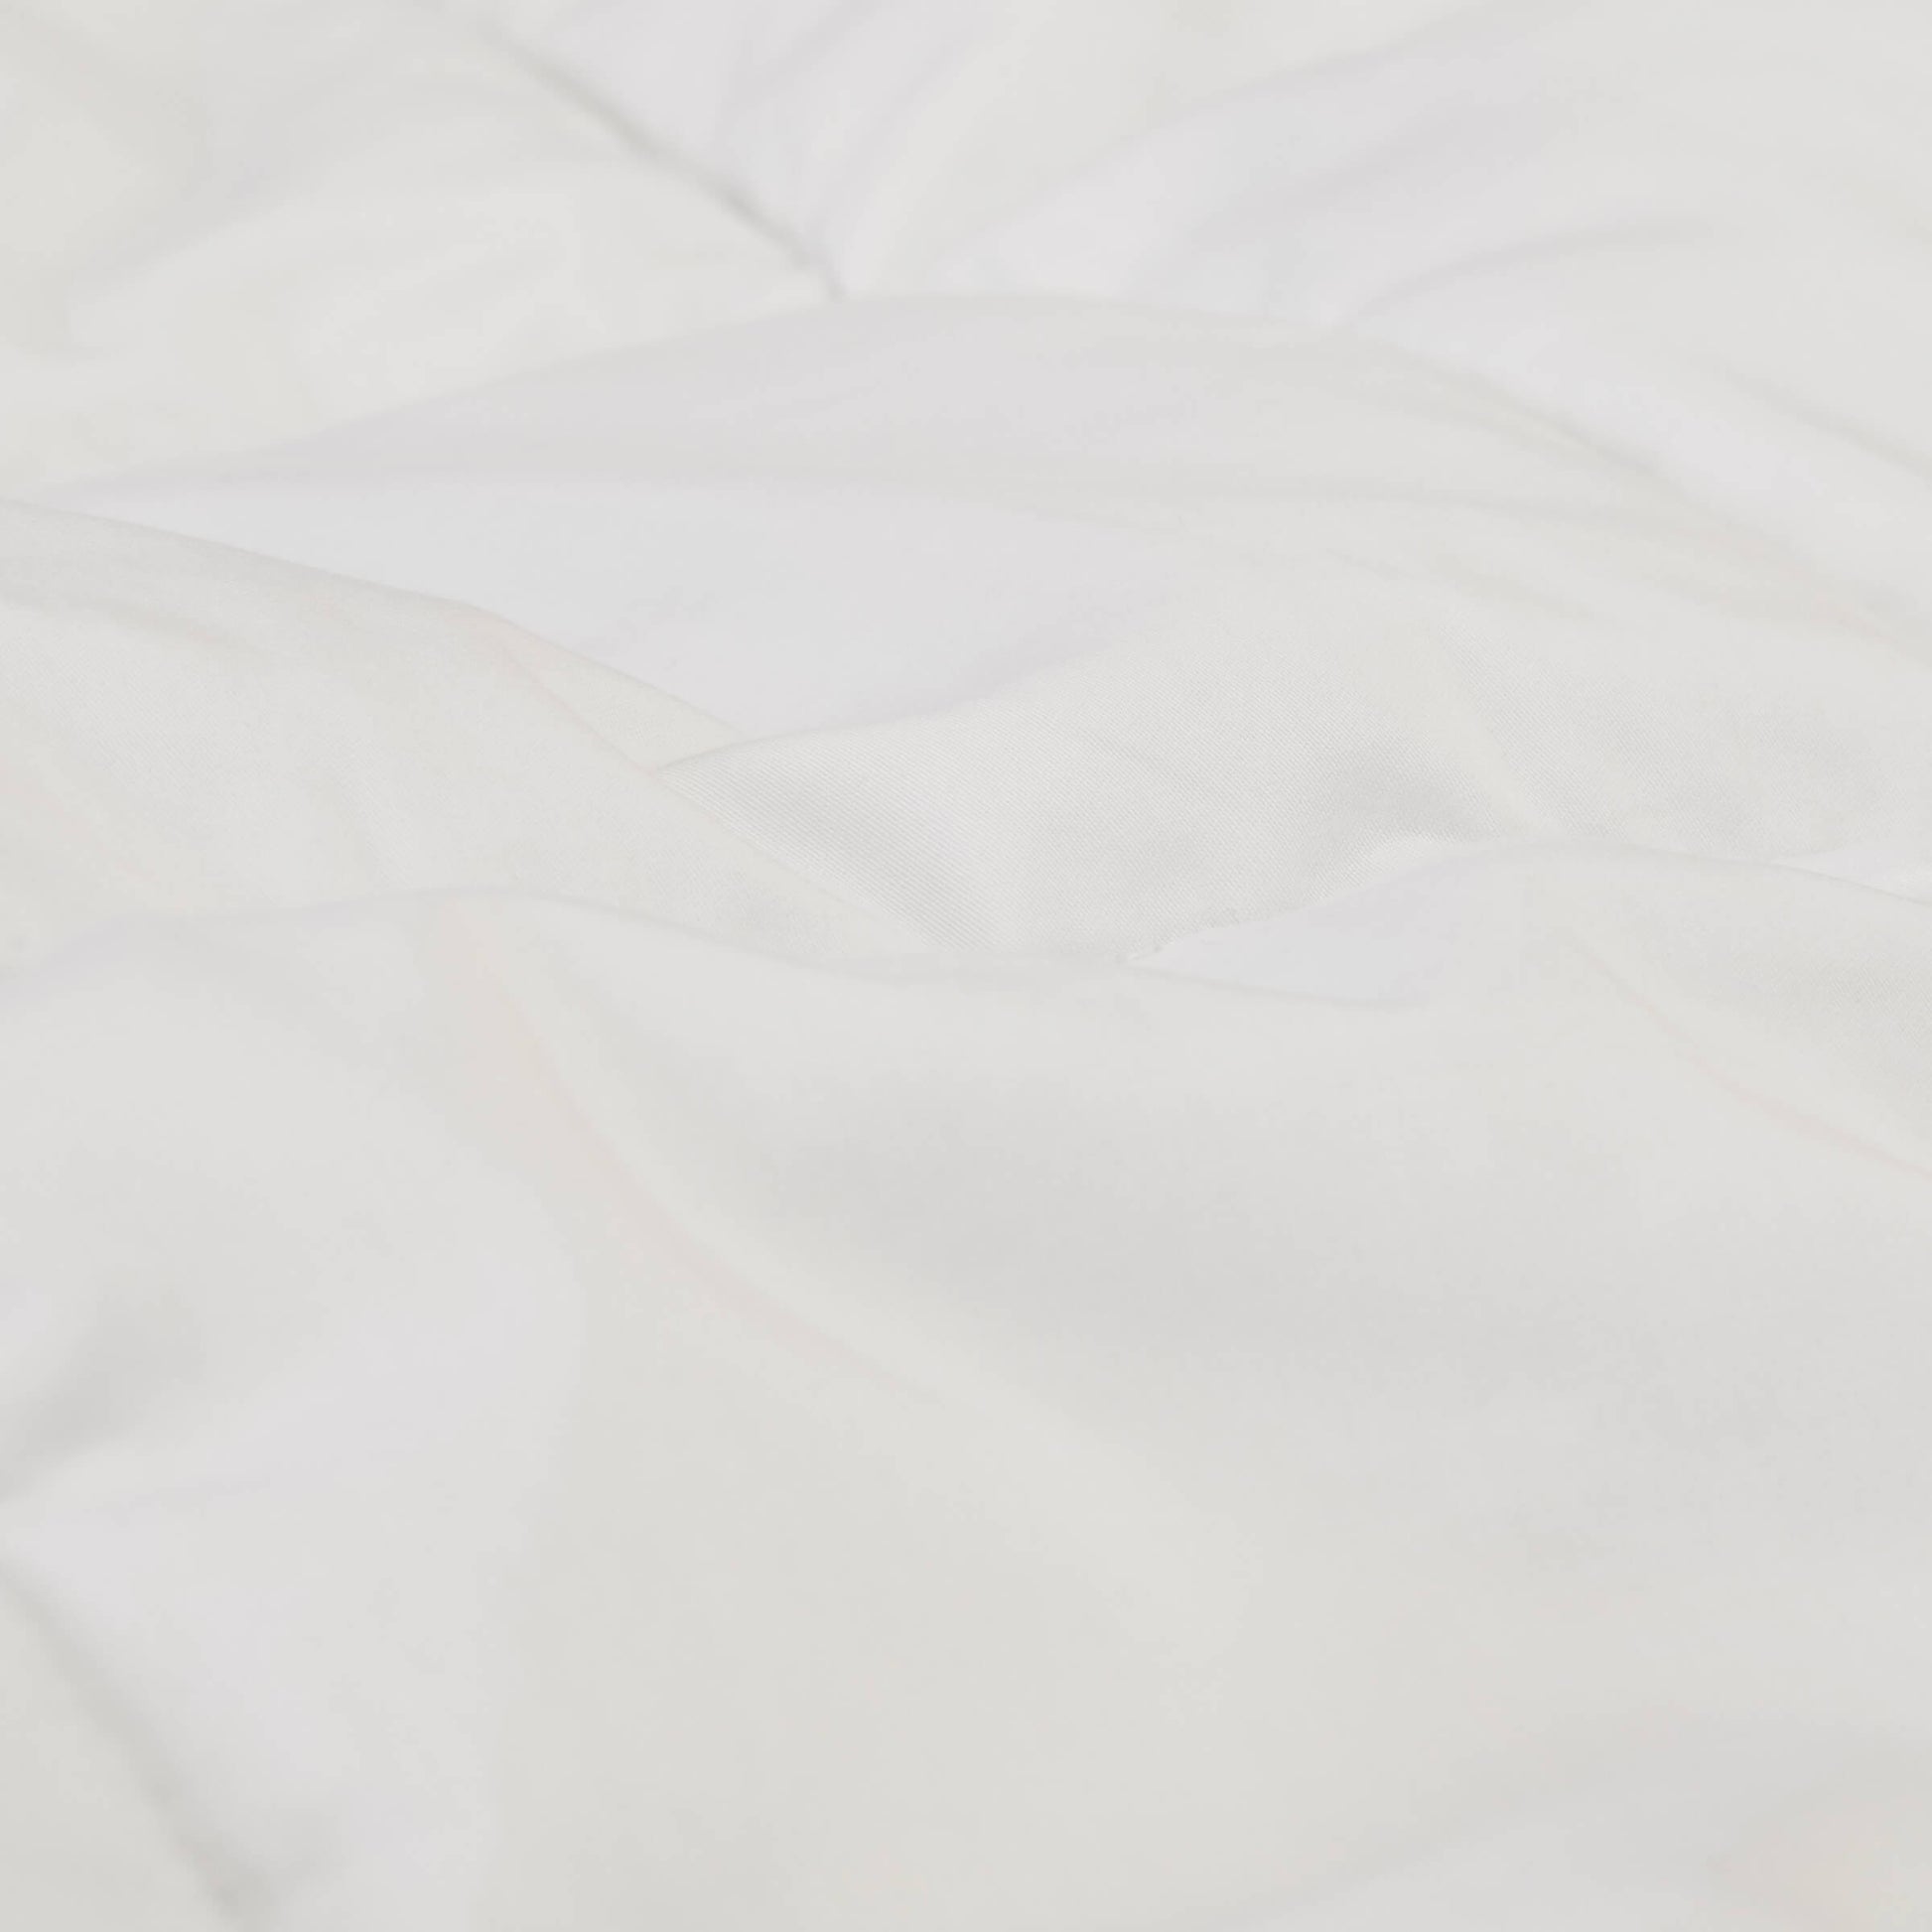 Detailed view of the Slumber Cloud Core Mattress Pad fabric